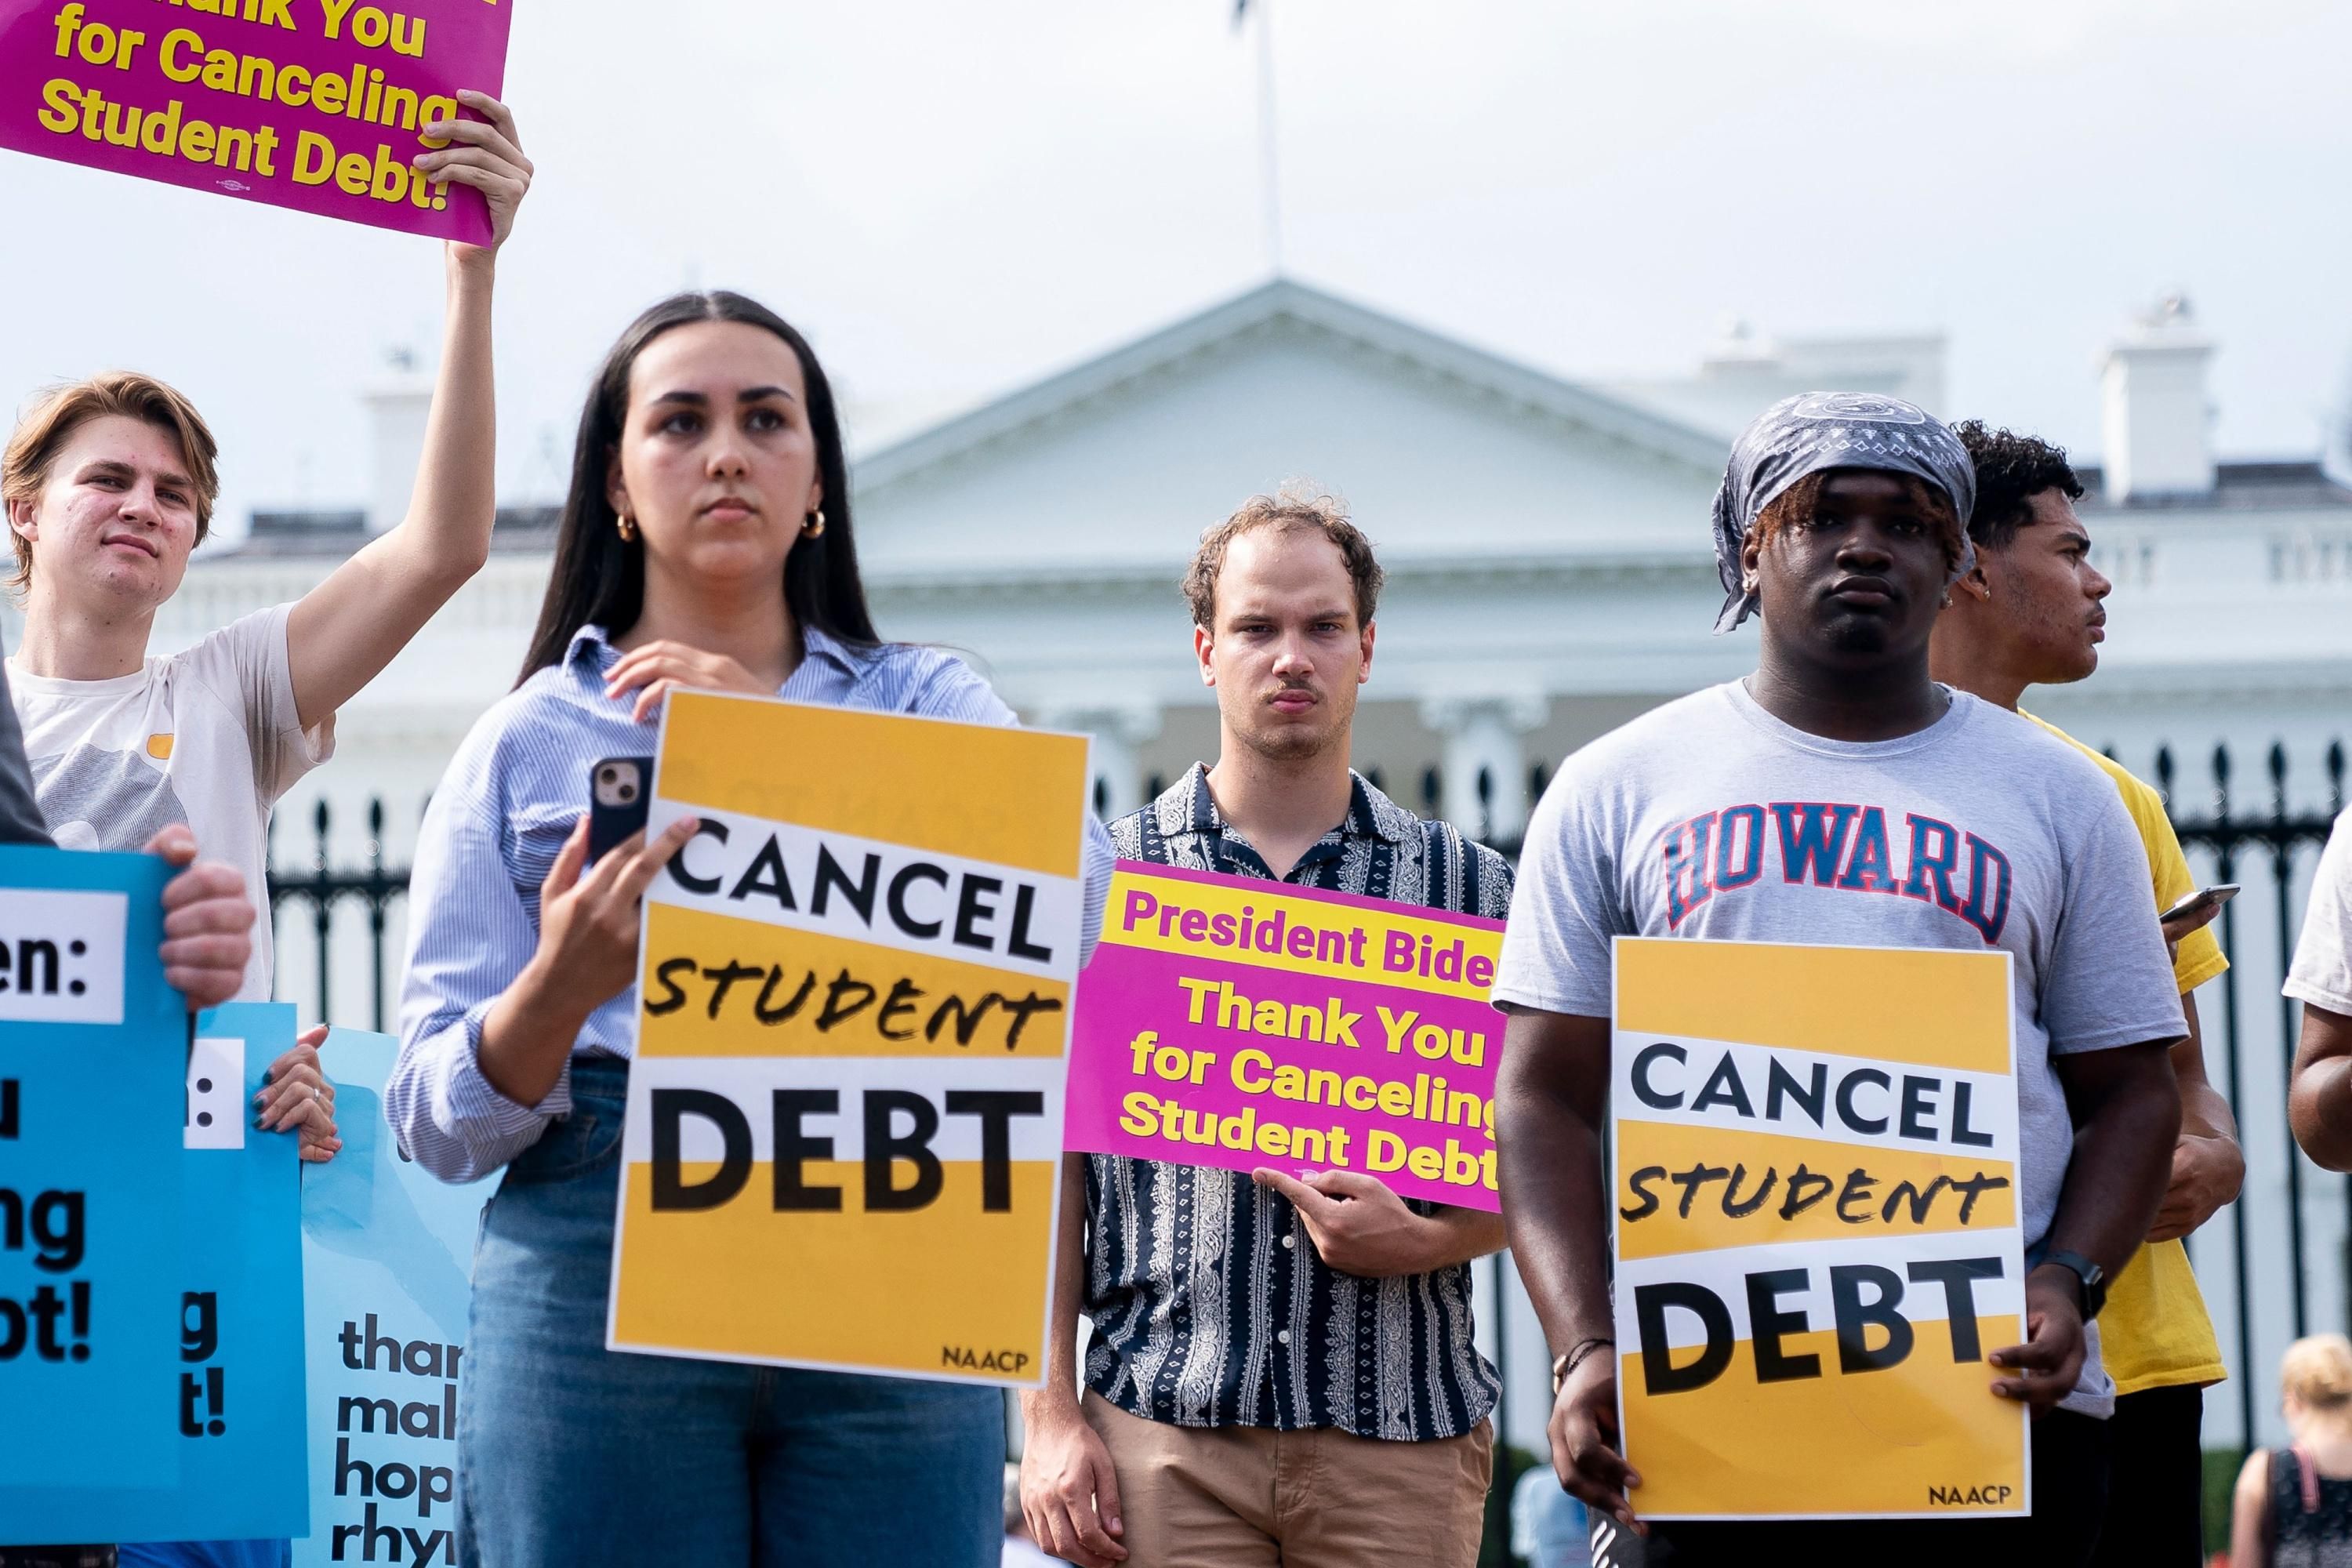 People rally in support of student debt cancellation outside of the White House